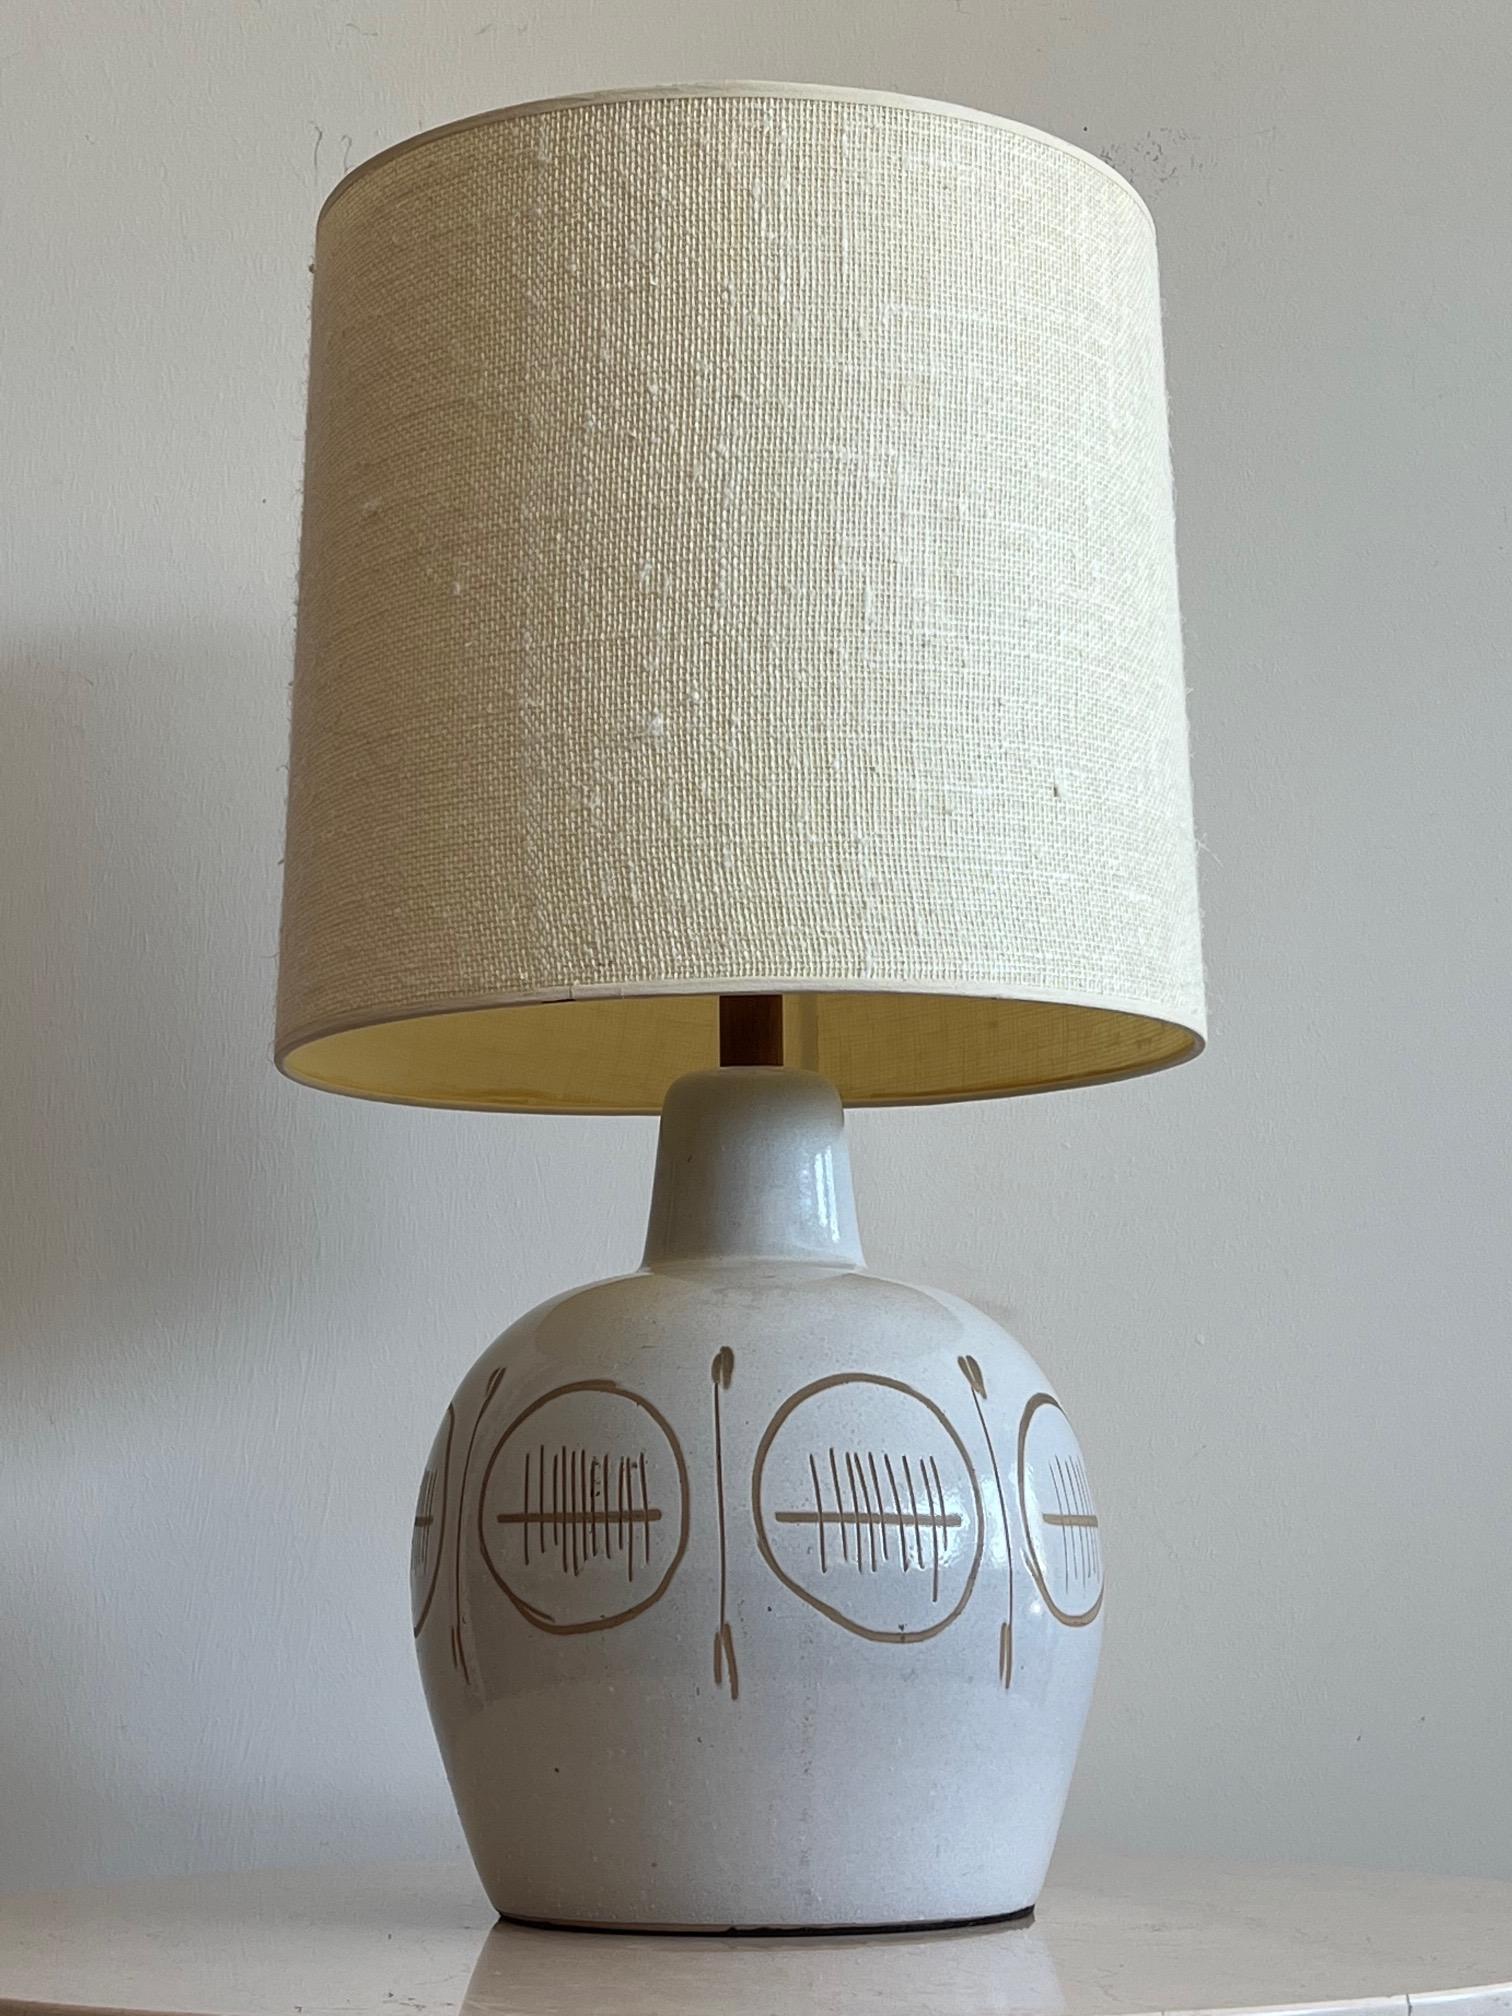 An interesting Martz ceramic lamp with whimsical sgraffito decoration.